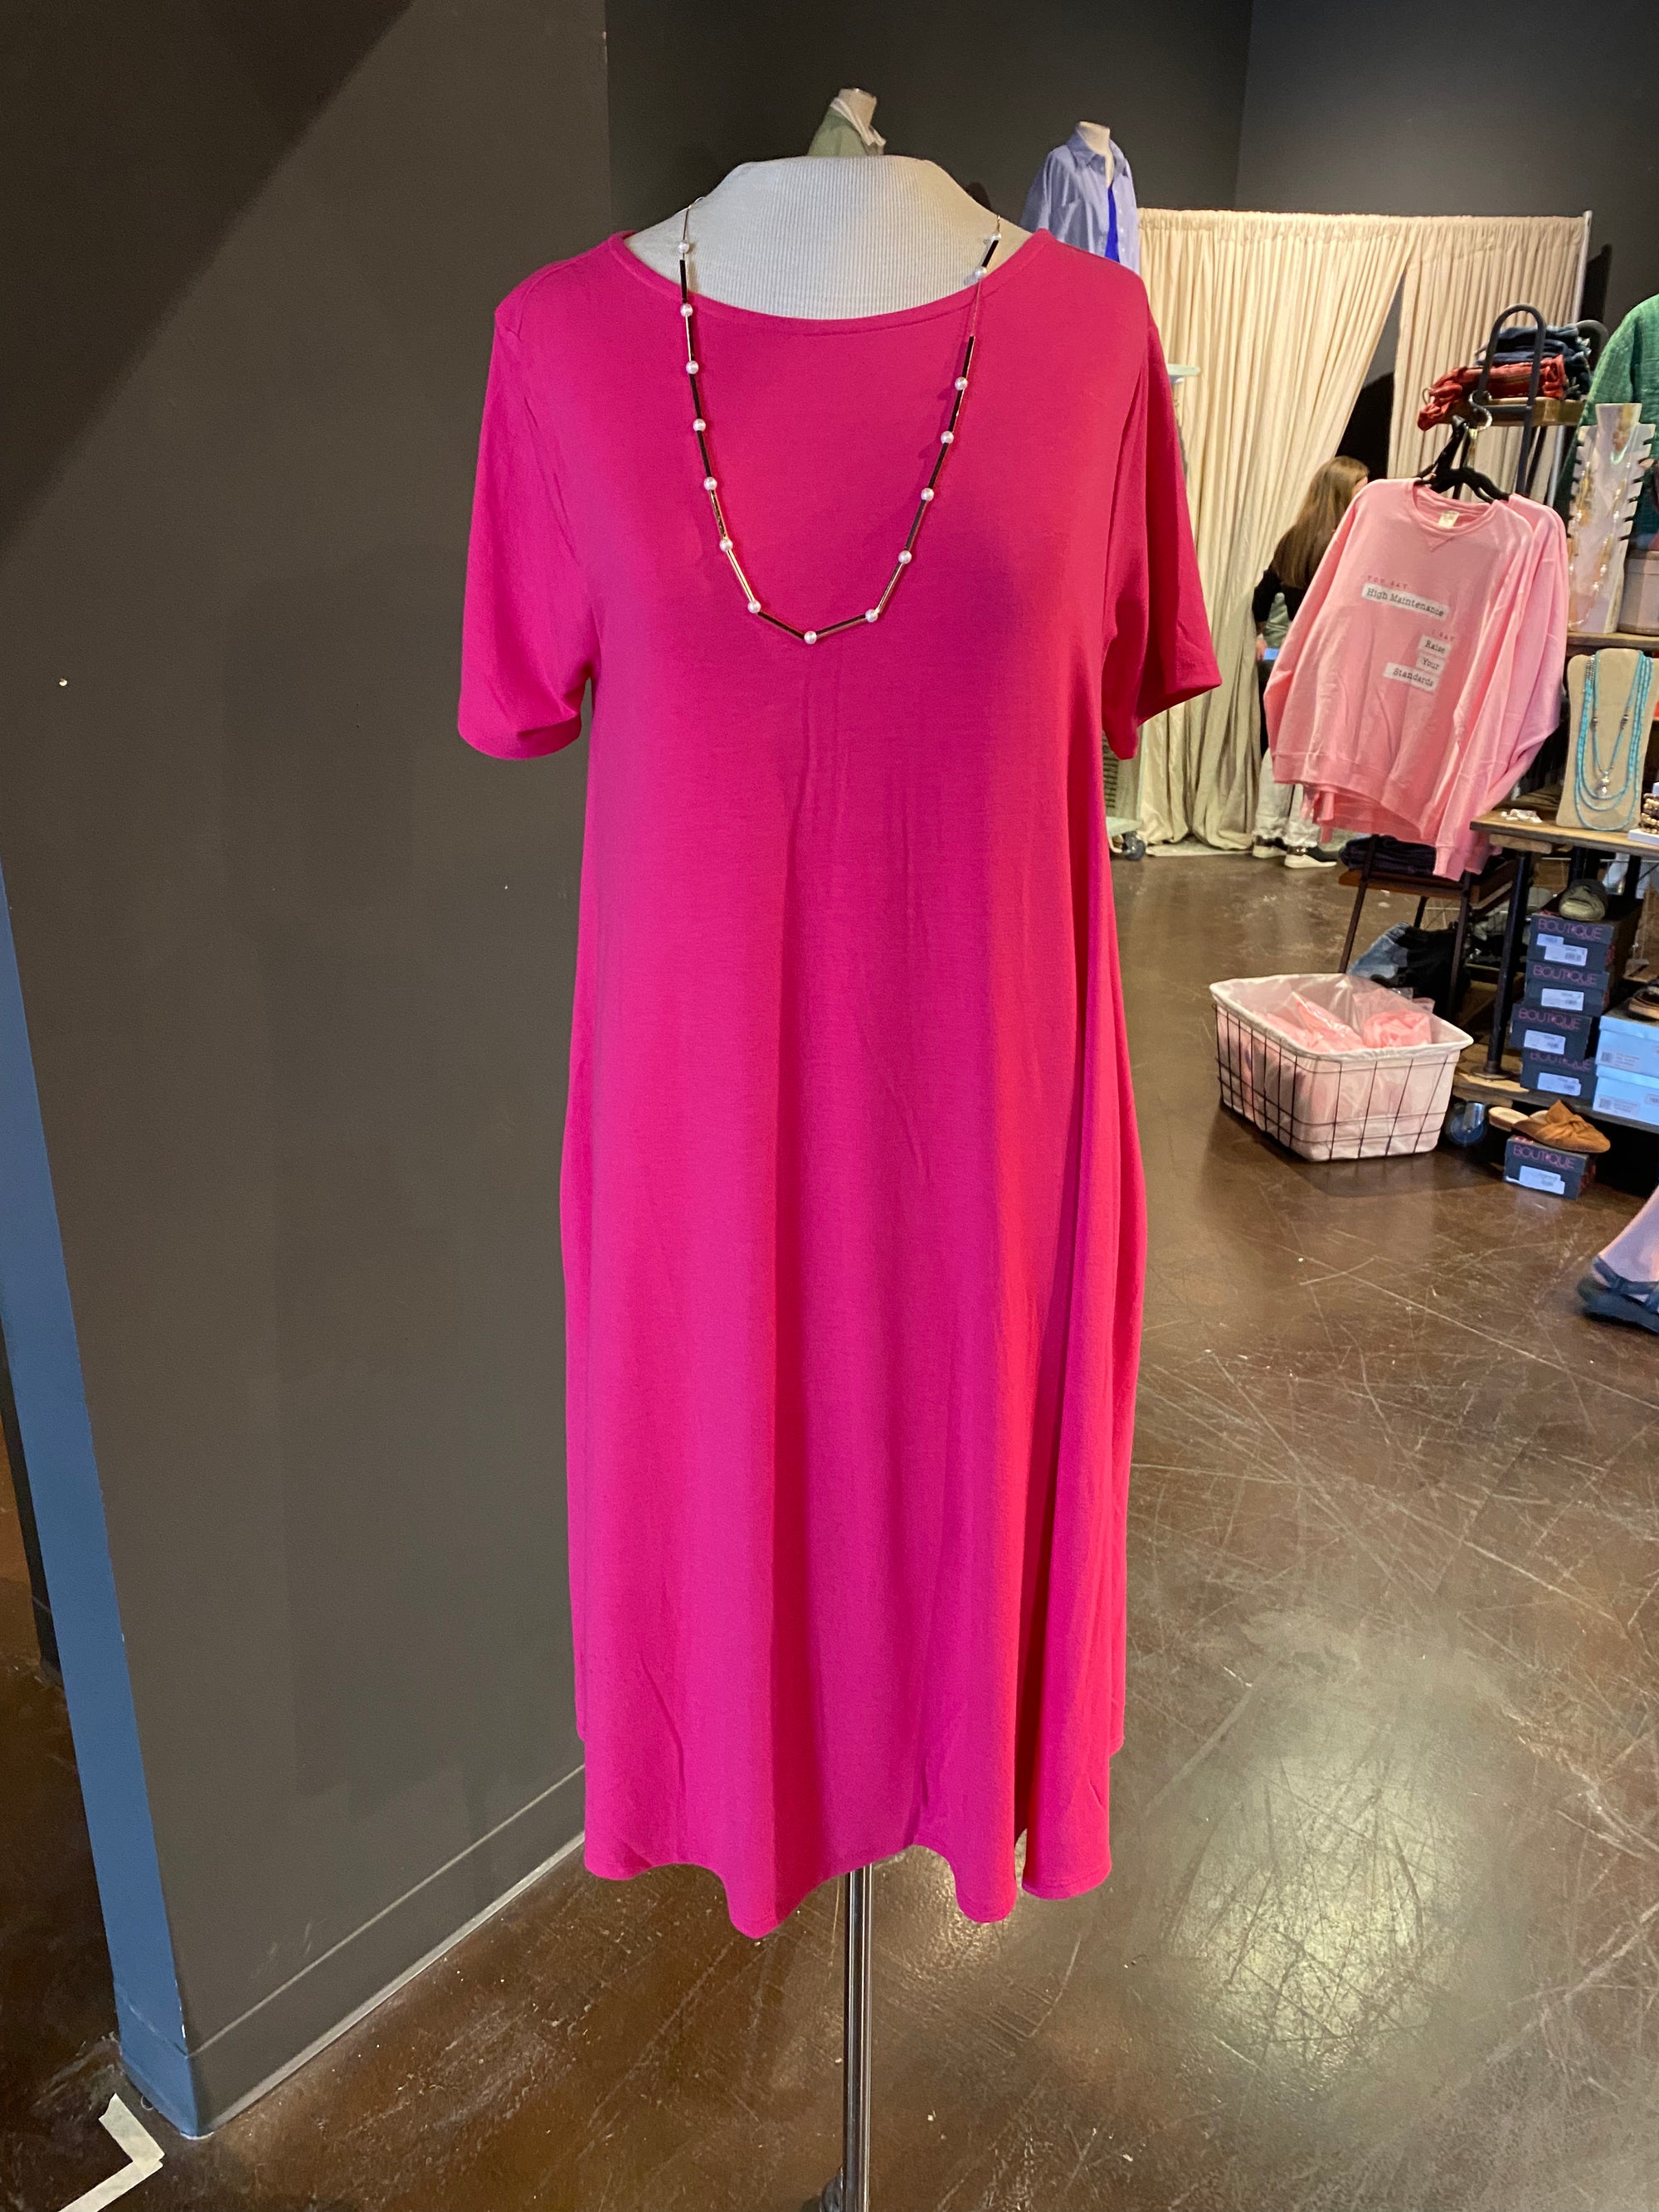 Casual But Hot Pink Dress